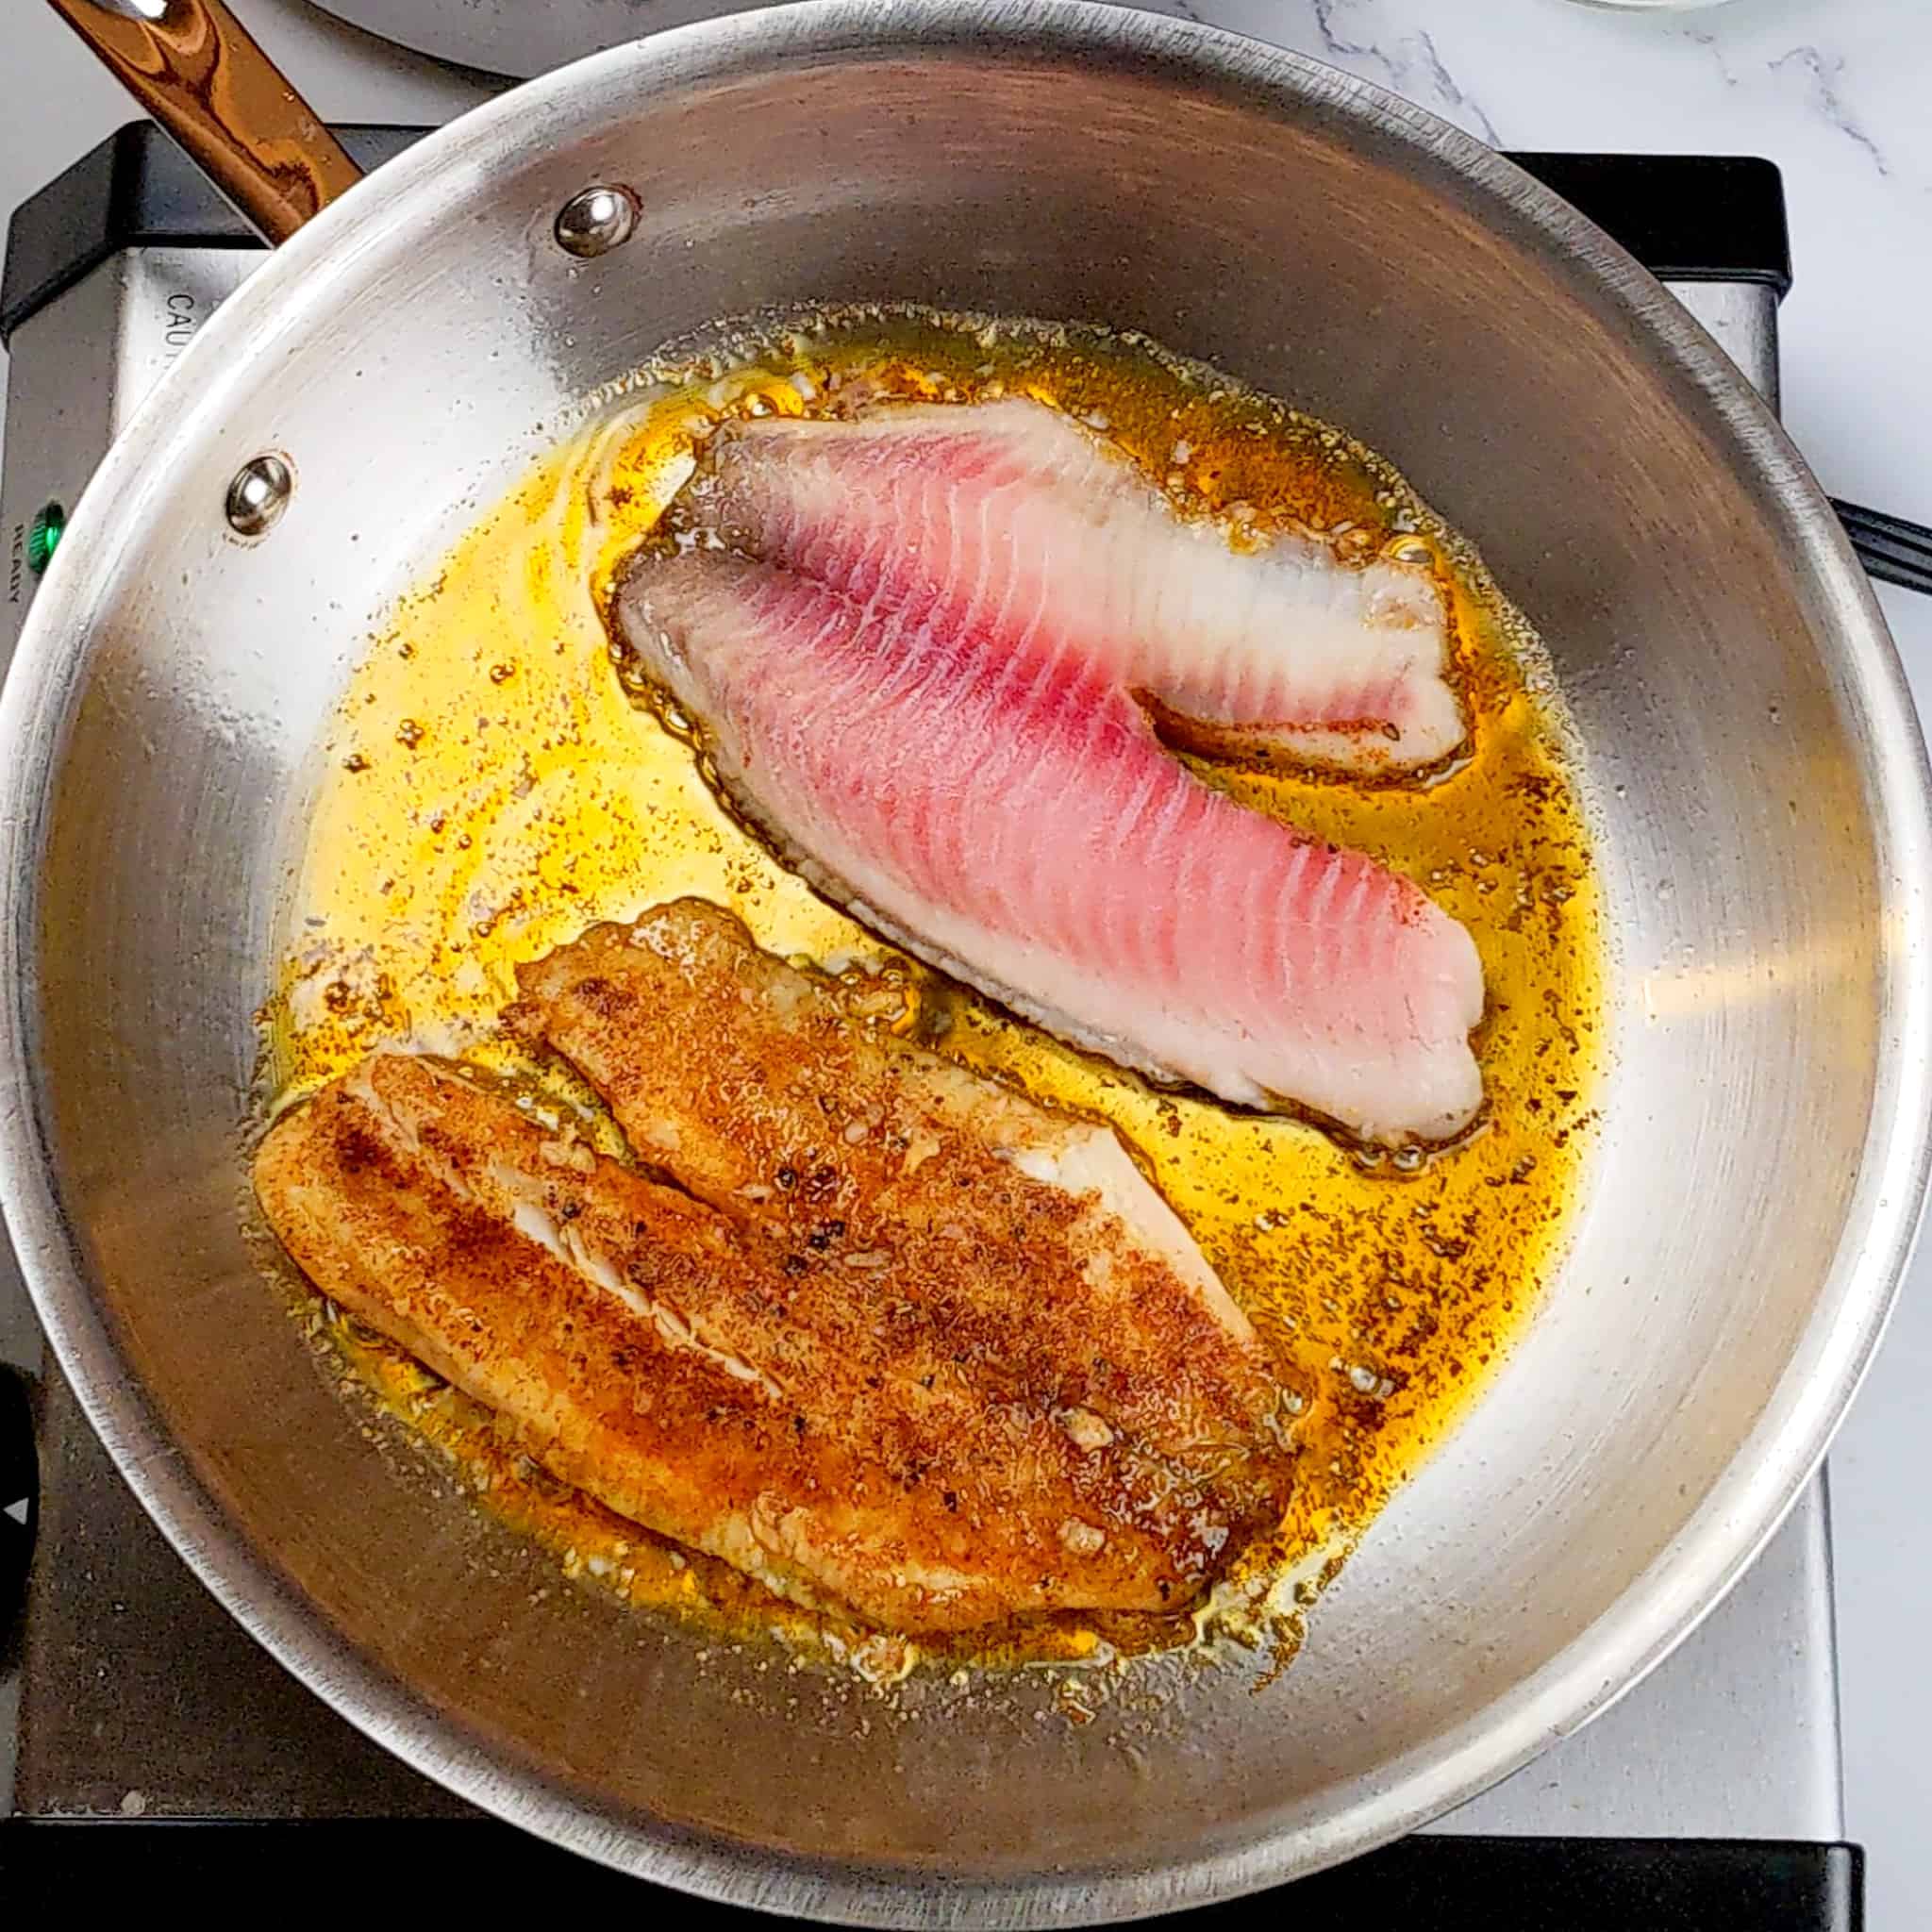 two tilapia filets, one season side down and the other flipped searing in an stainless steel frying pan.